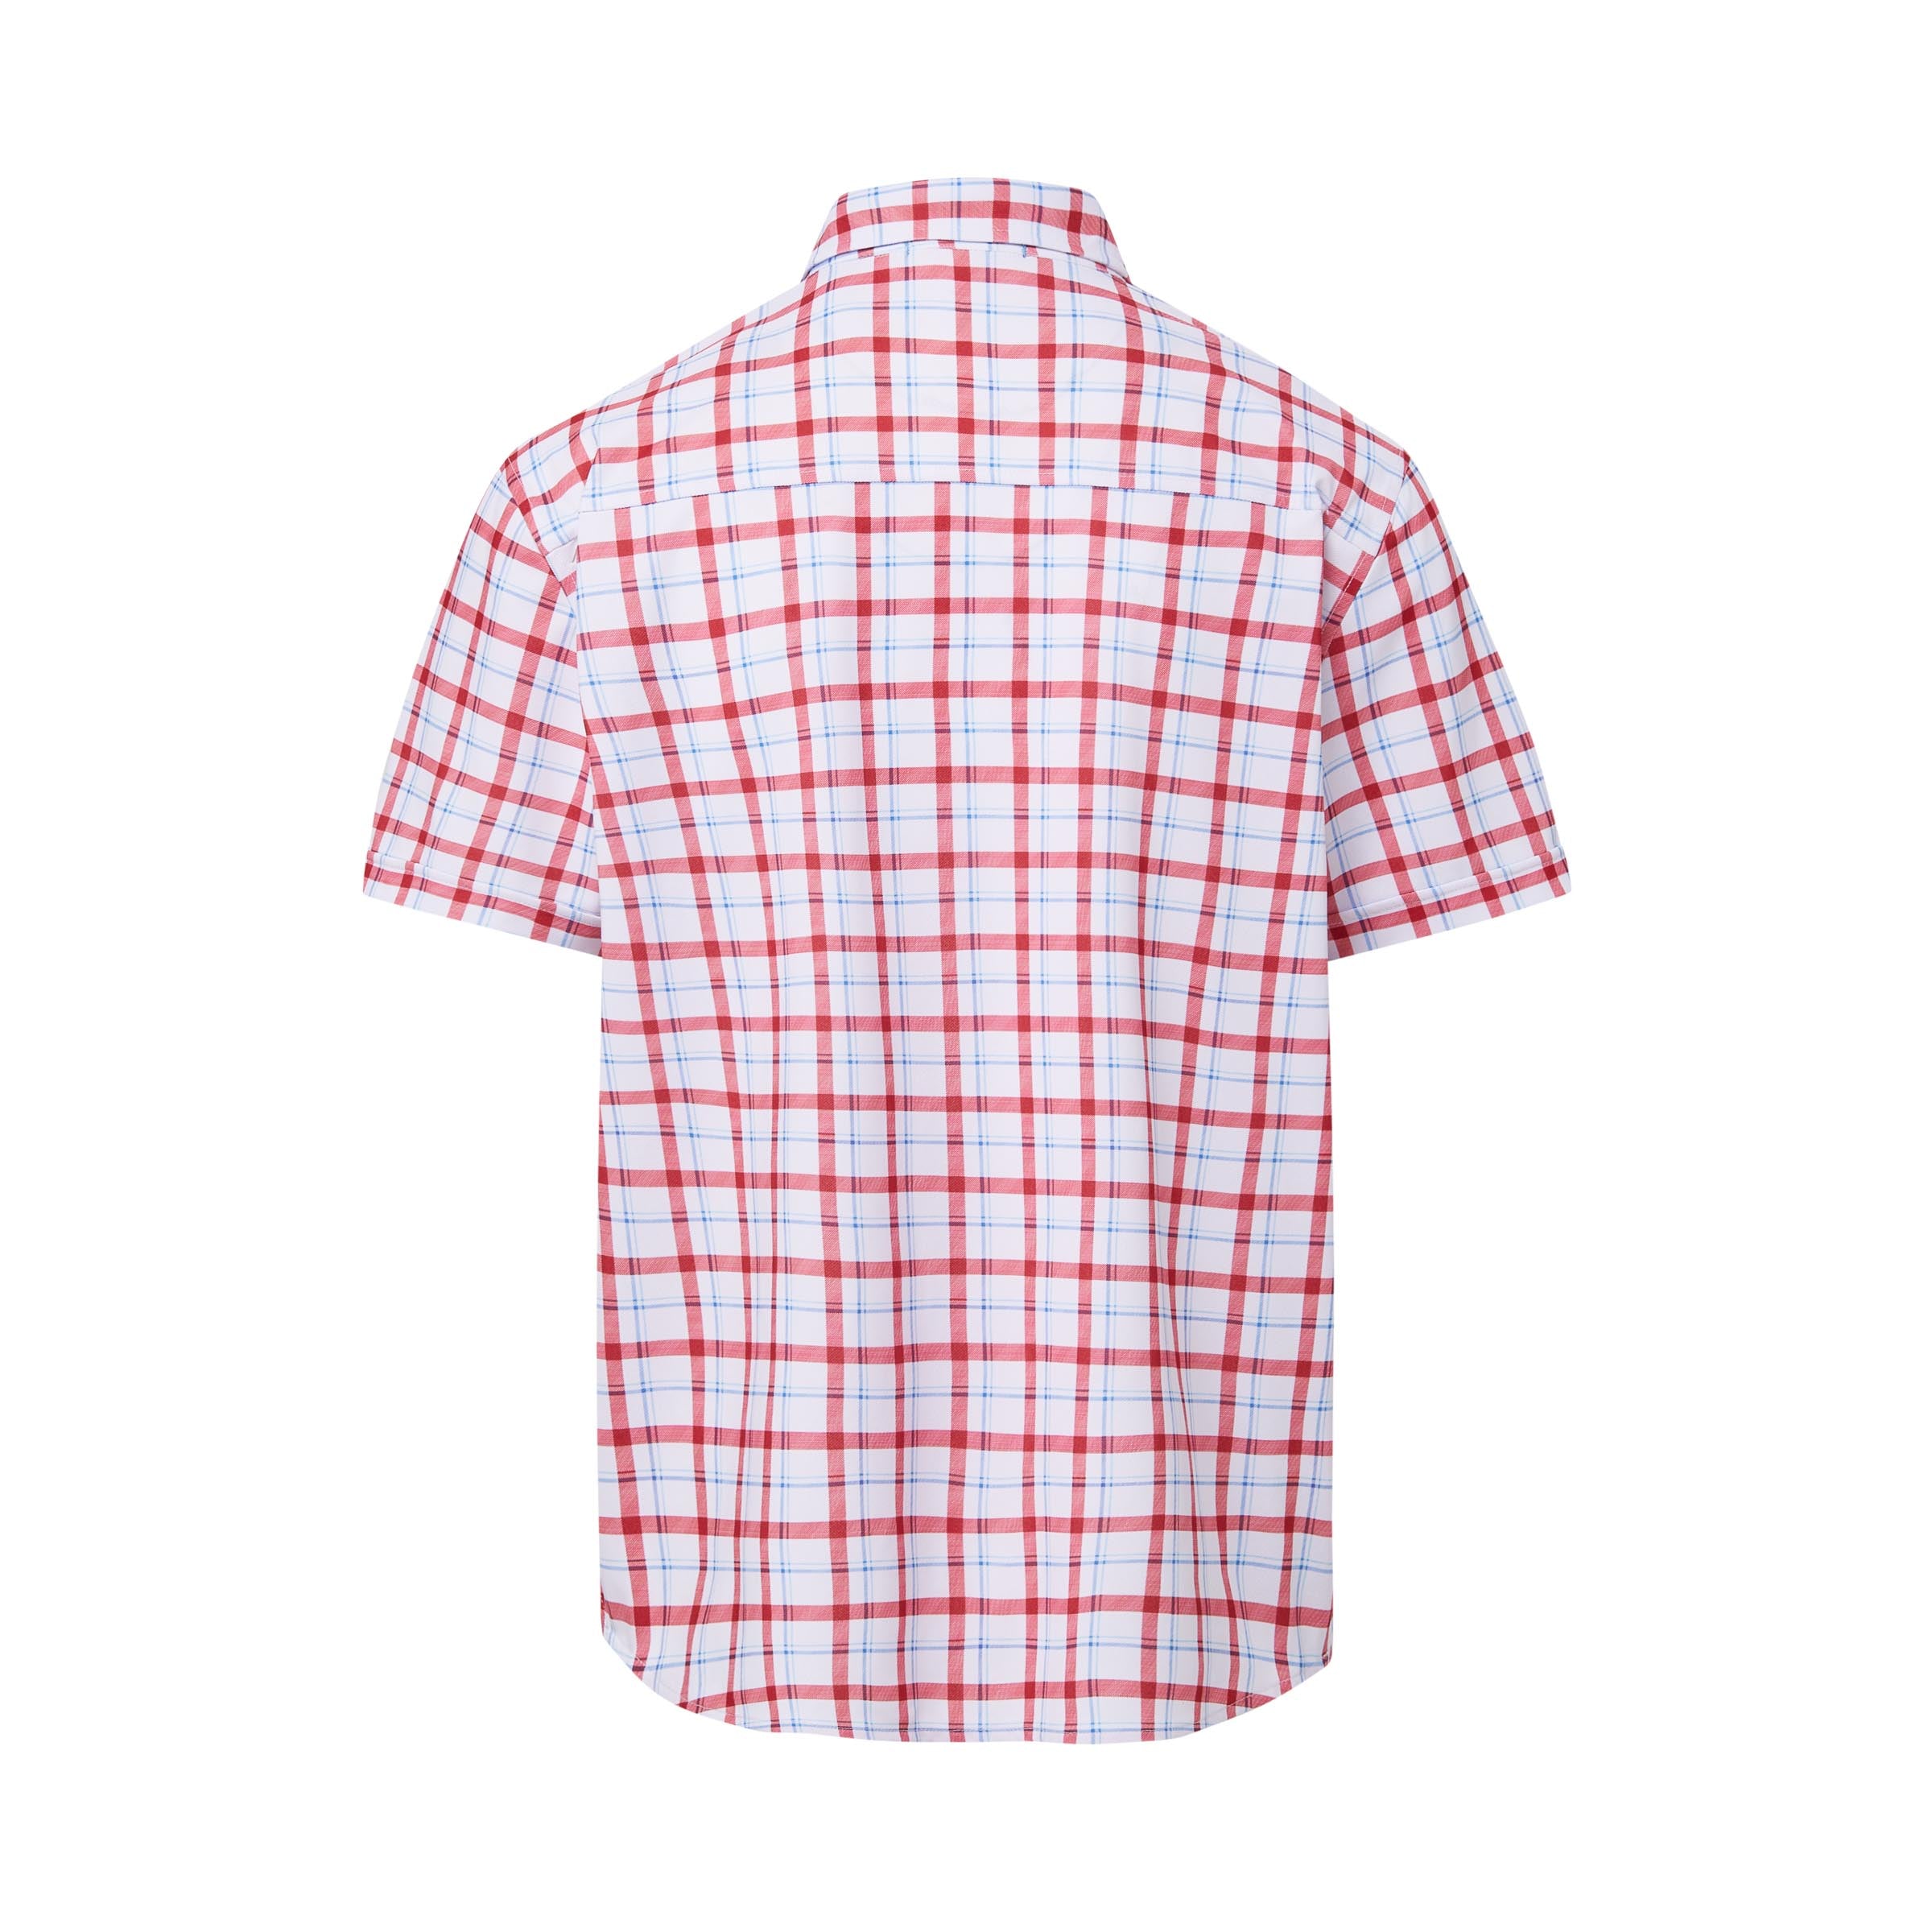 MagnaReady x Arctic Cooling Pique Polo Short Sleeves in Red Plaid